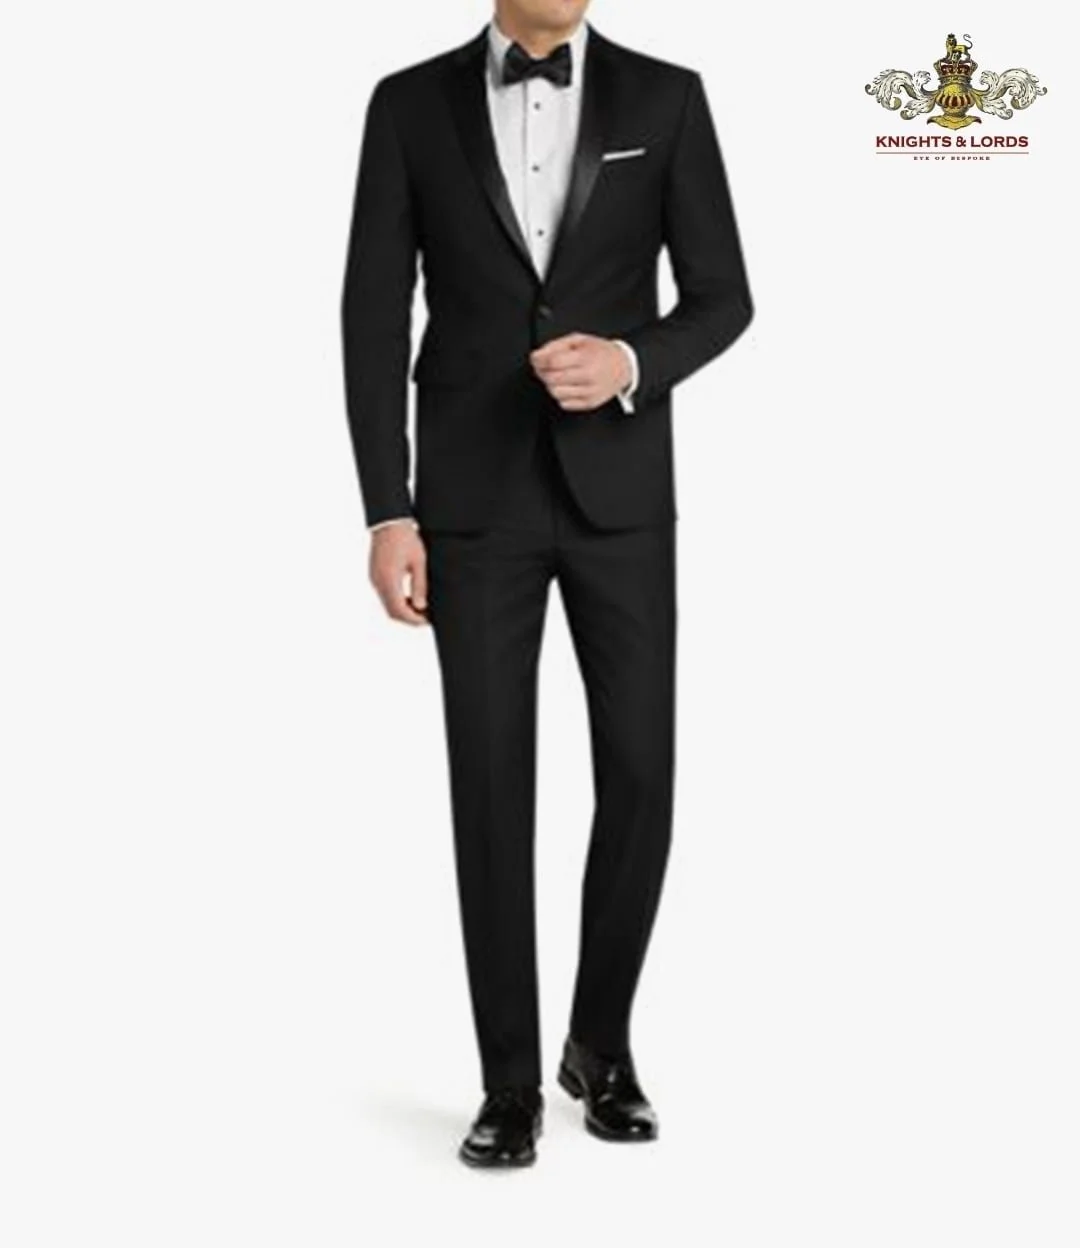 Bespoke Tuxedo Tailoring By Knights & Lords